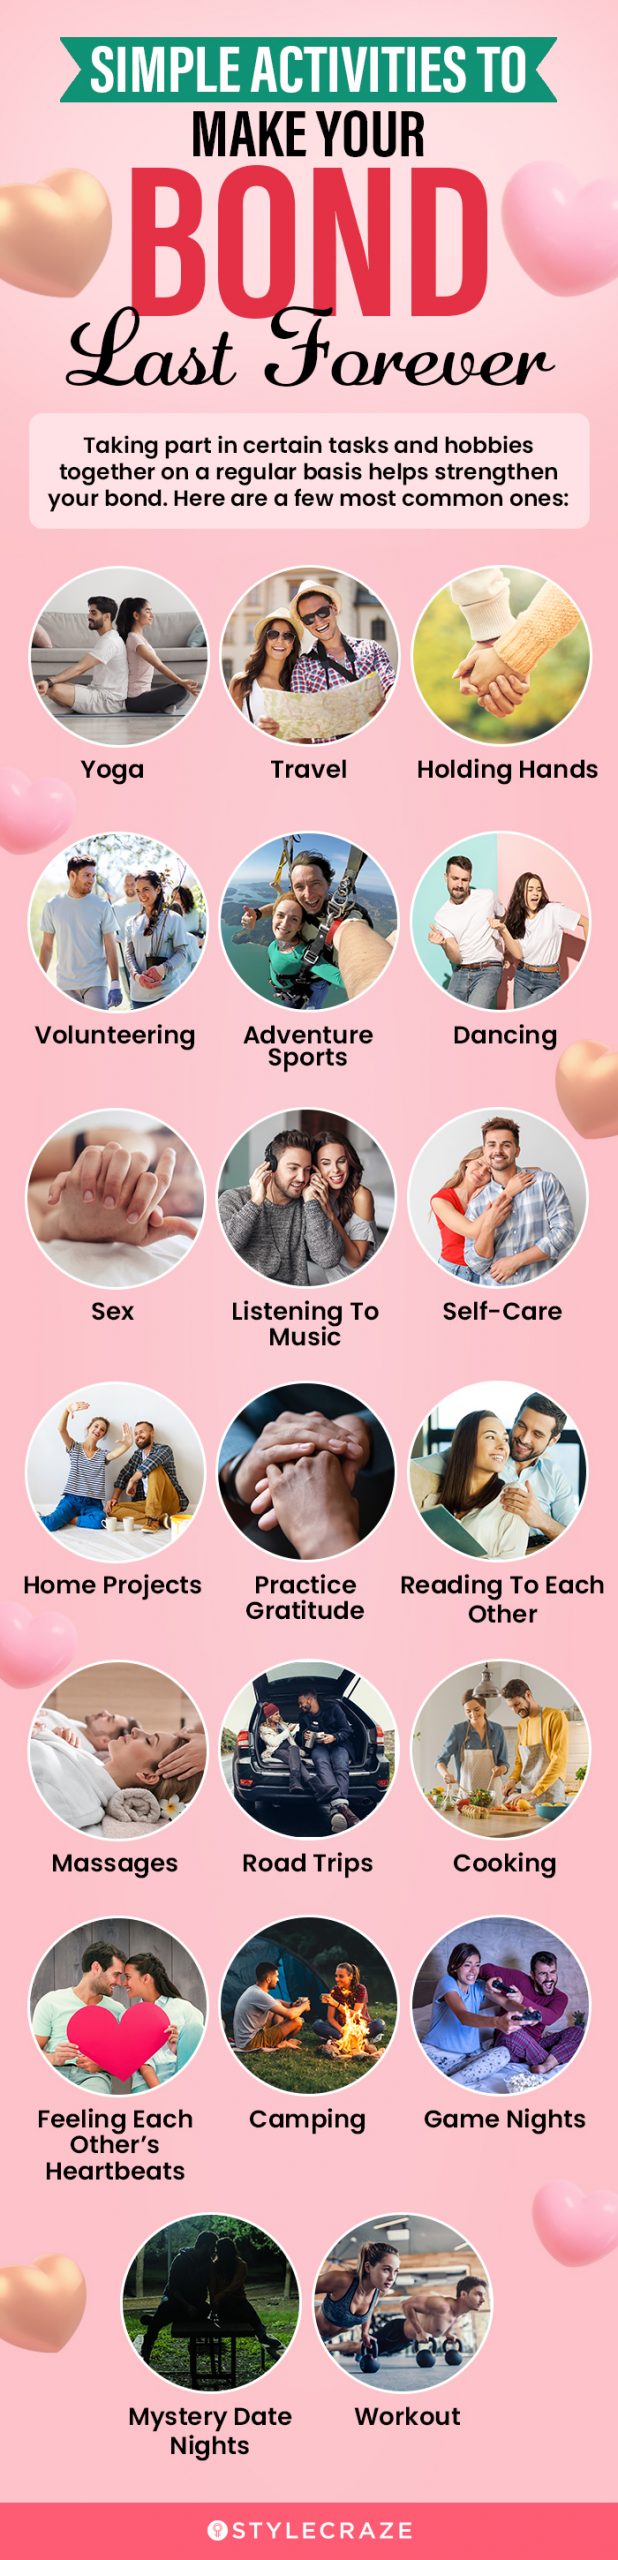 simple activities to make your bond last forever [infographic]